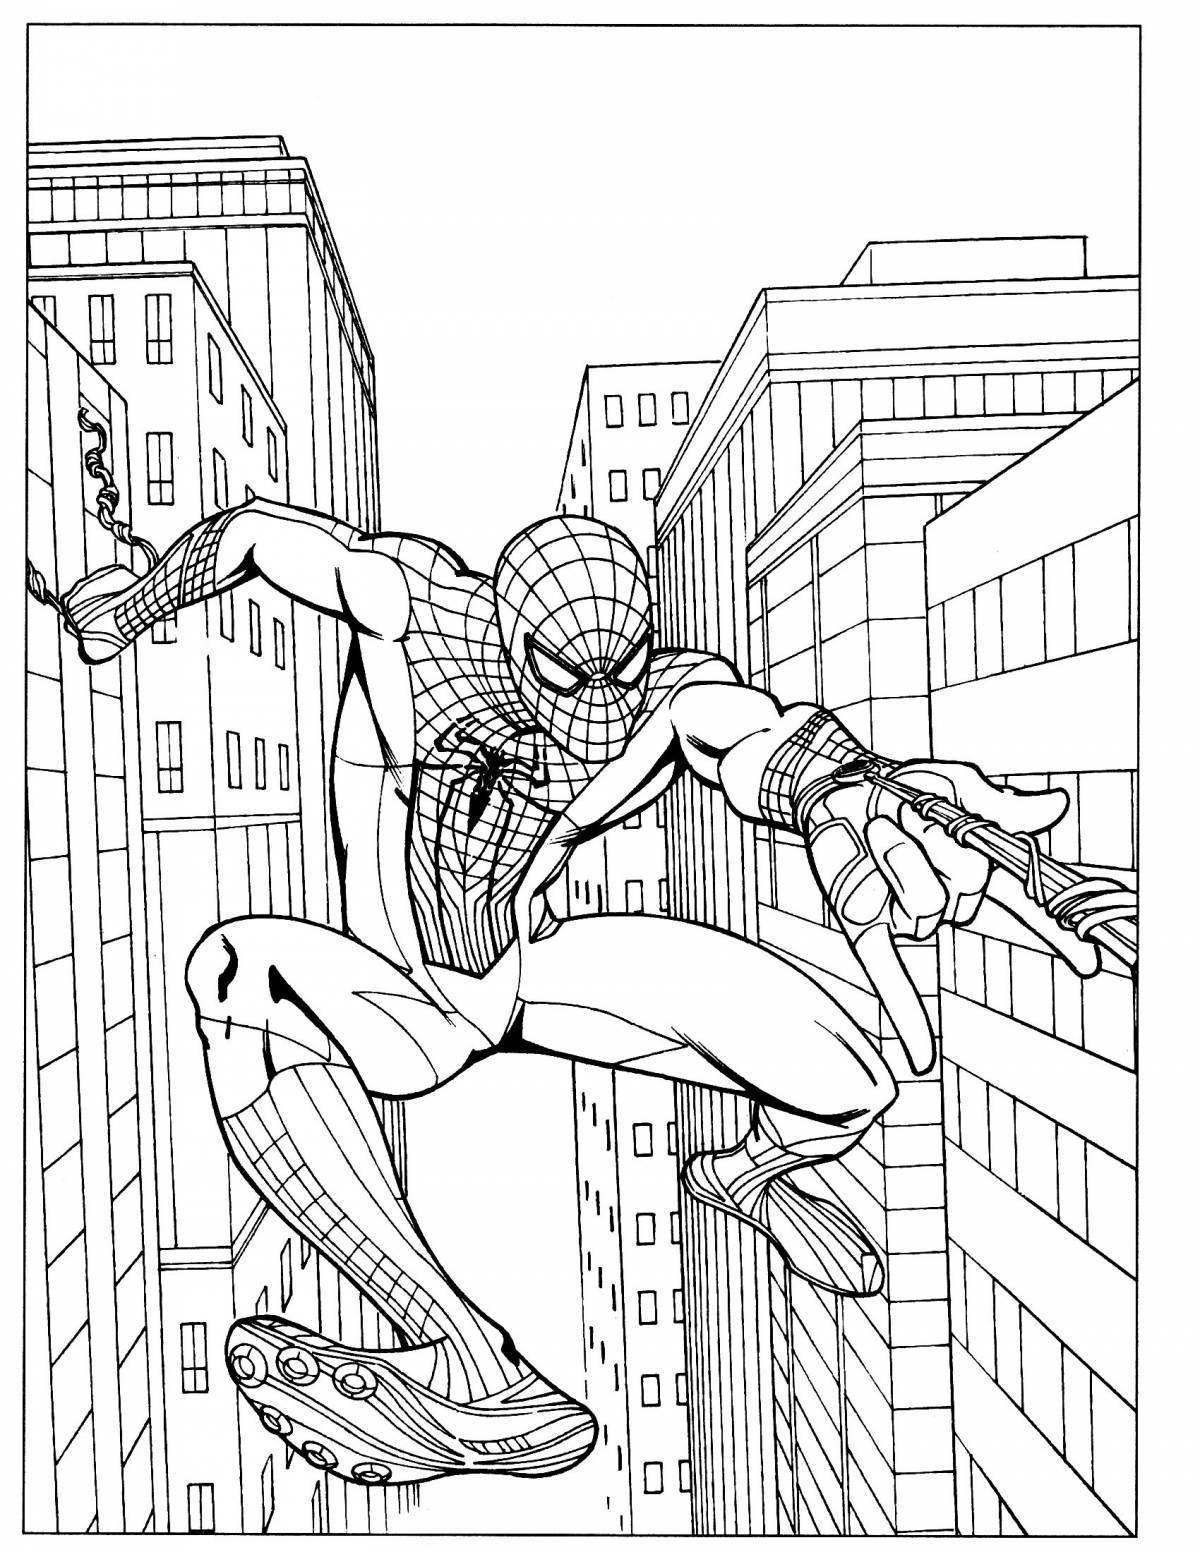 Adorable Comic Spider-Man Coloring Page